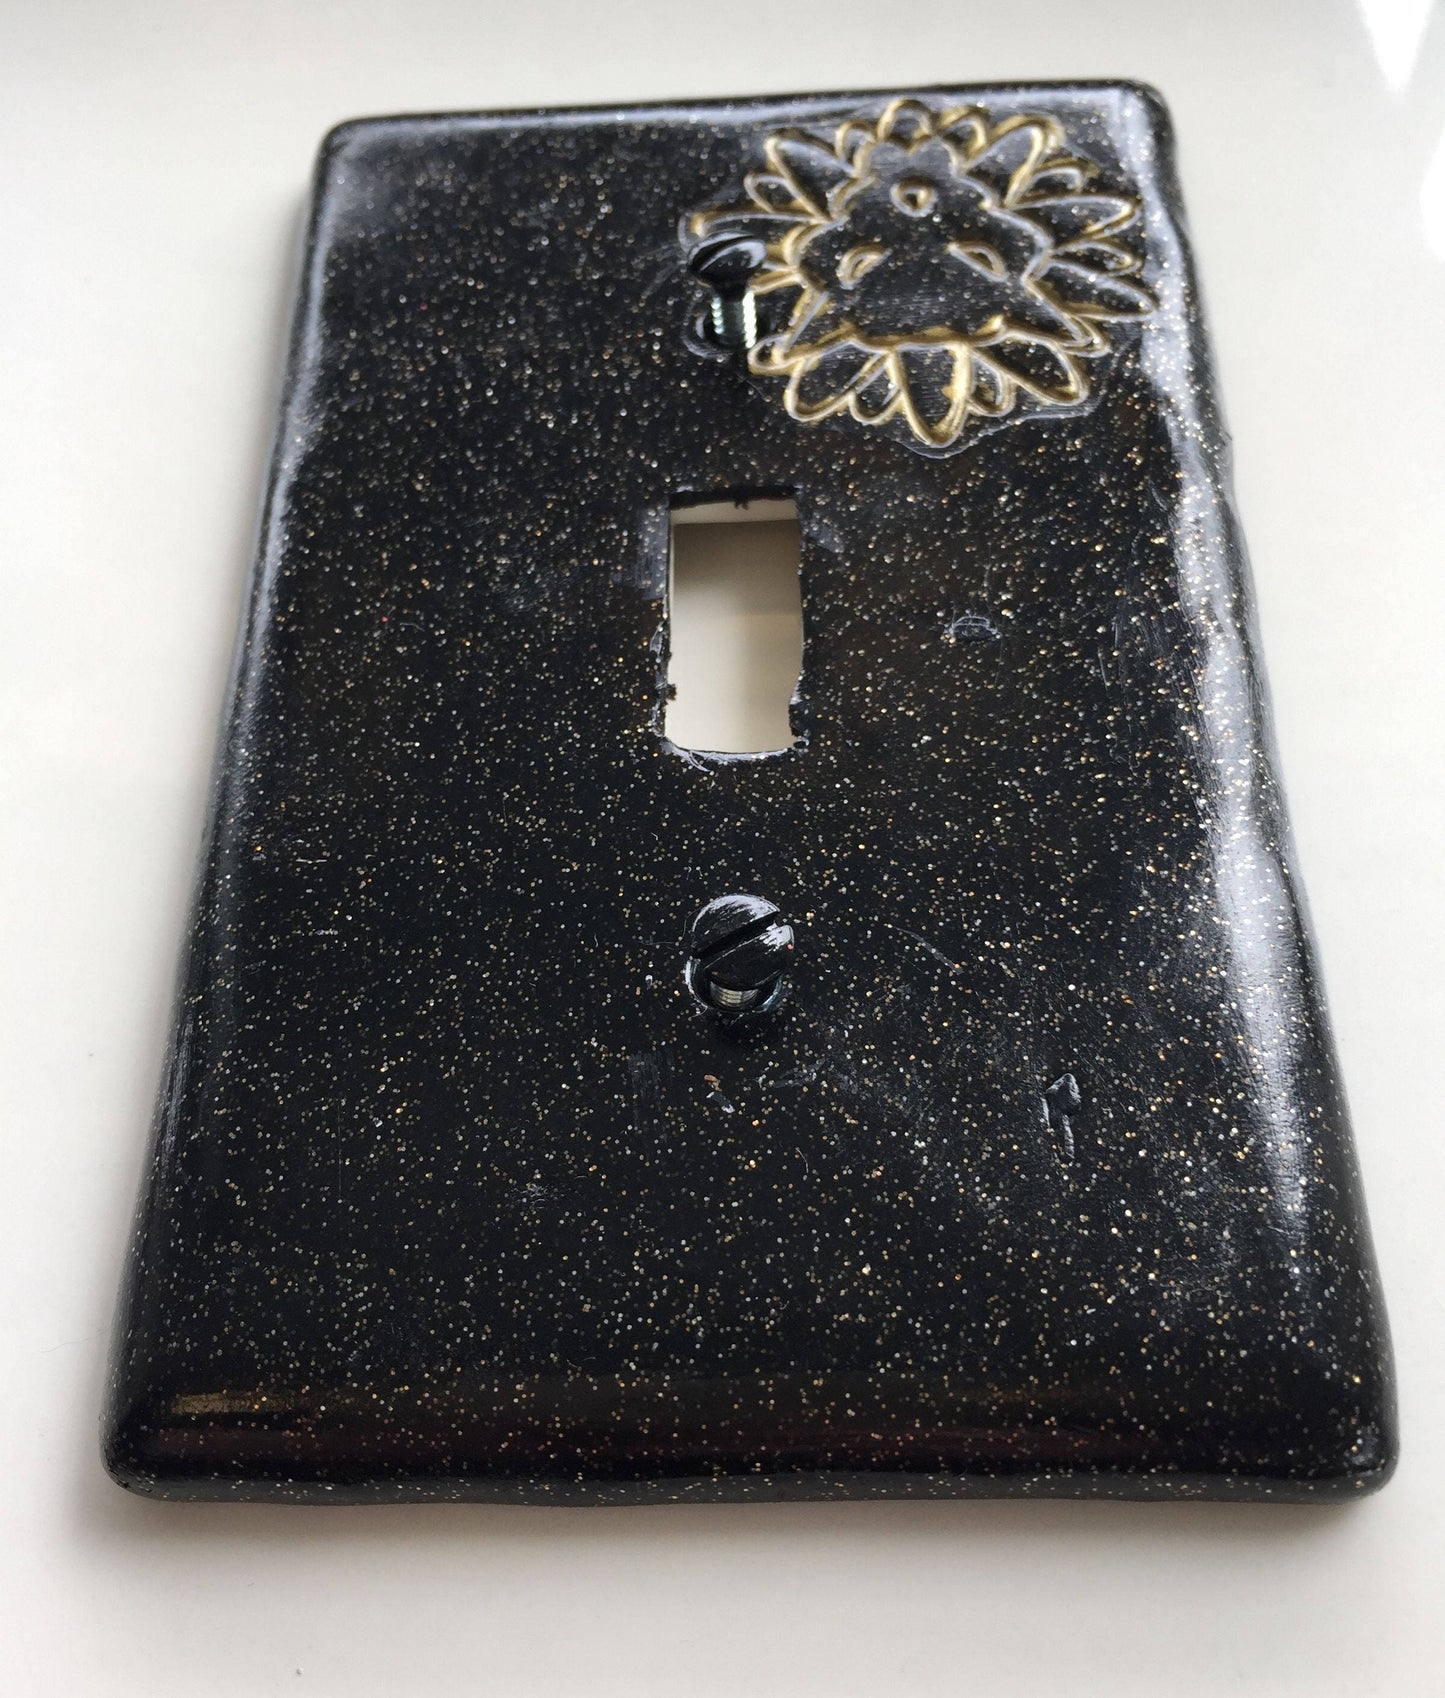 Leo The Lion light switch plate cover for single toggle switch plate cover, black with glitter and gold metallic custom colors available